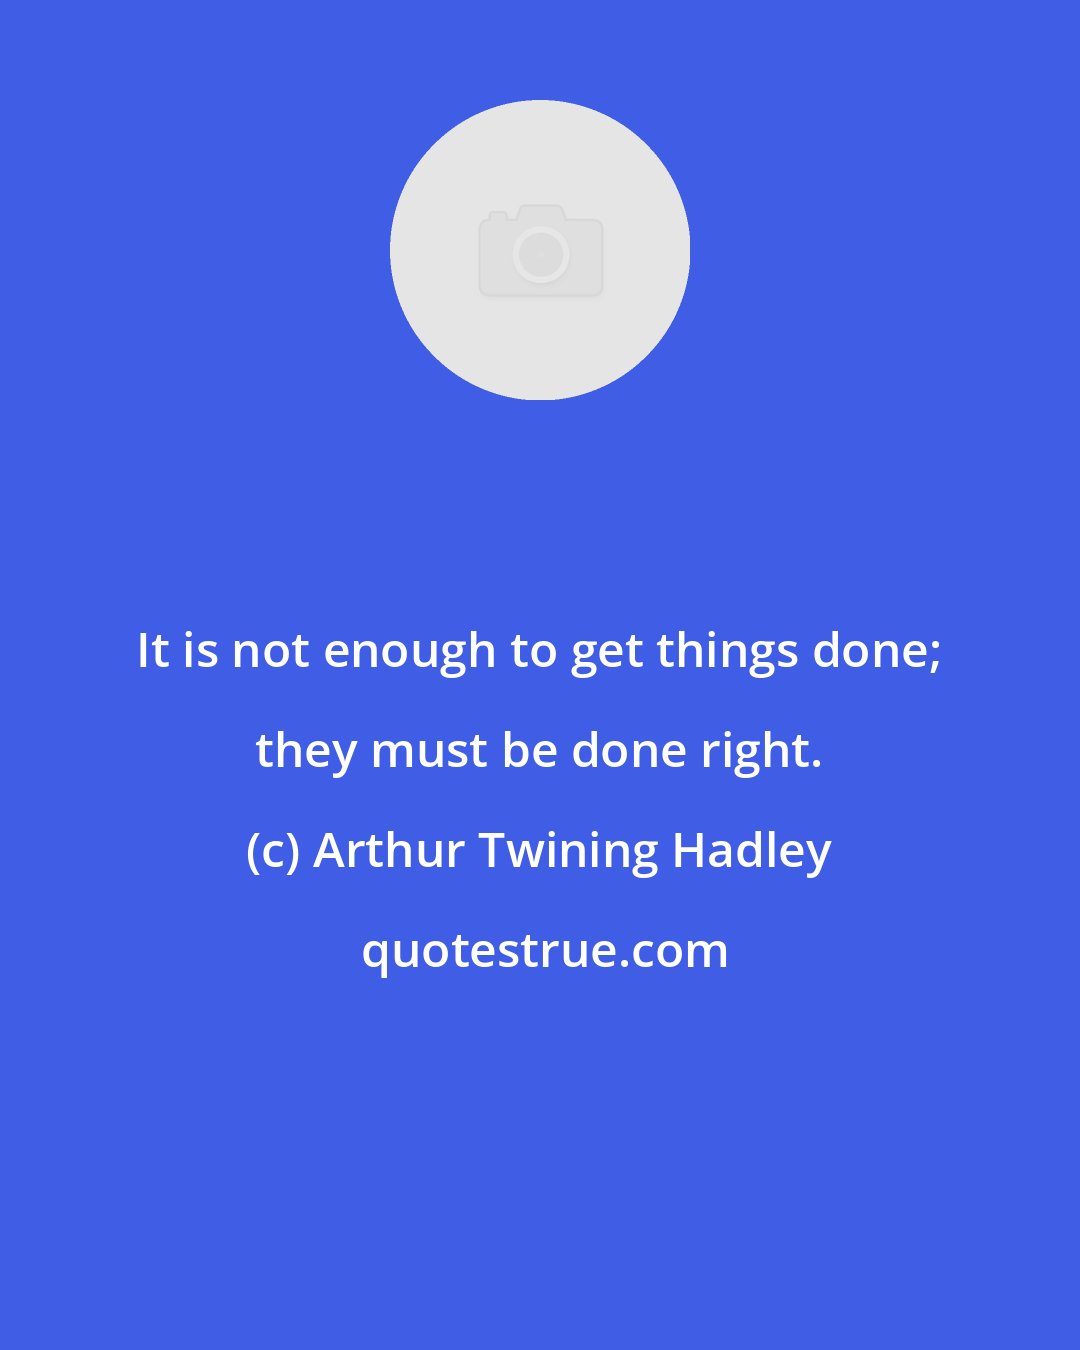 Arthur Twining Hadley: It is not enough to get things done; they must be done right.